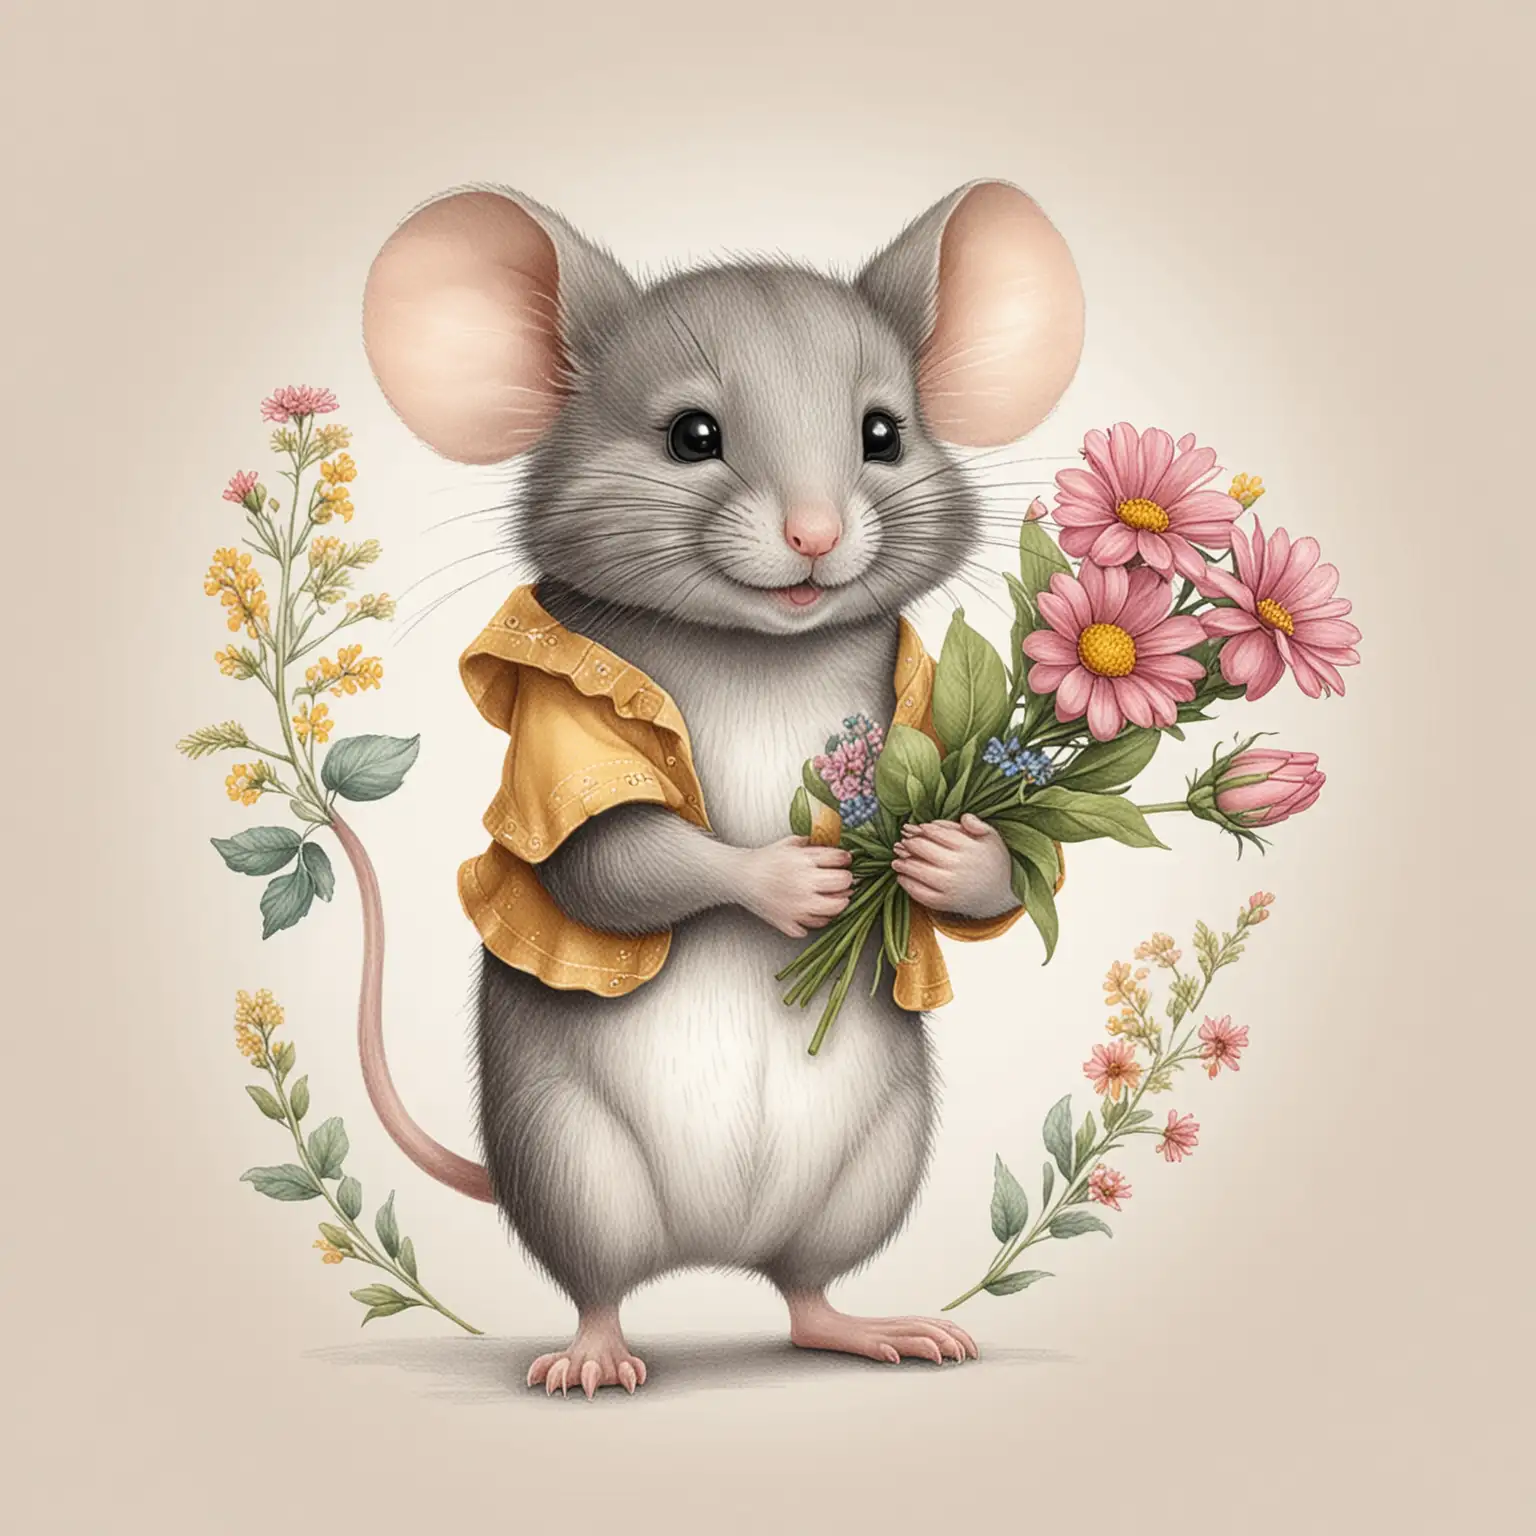 Adorable Mouse Holding Flowers Cute Pencil Drawing Clip Art